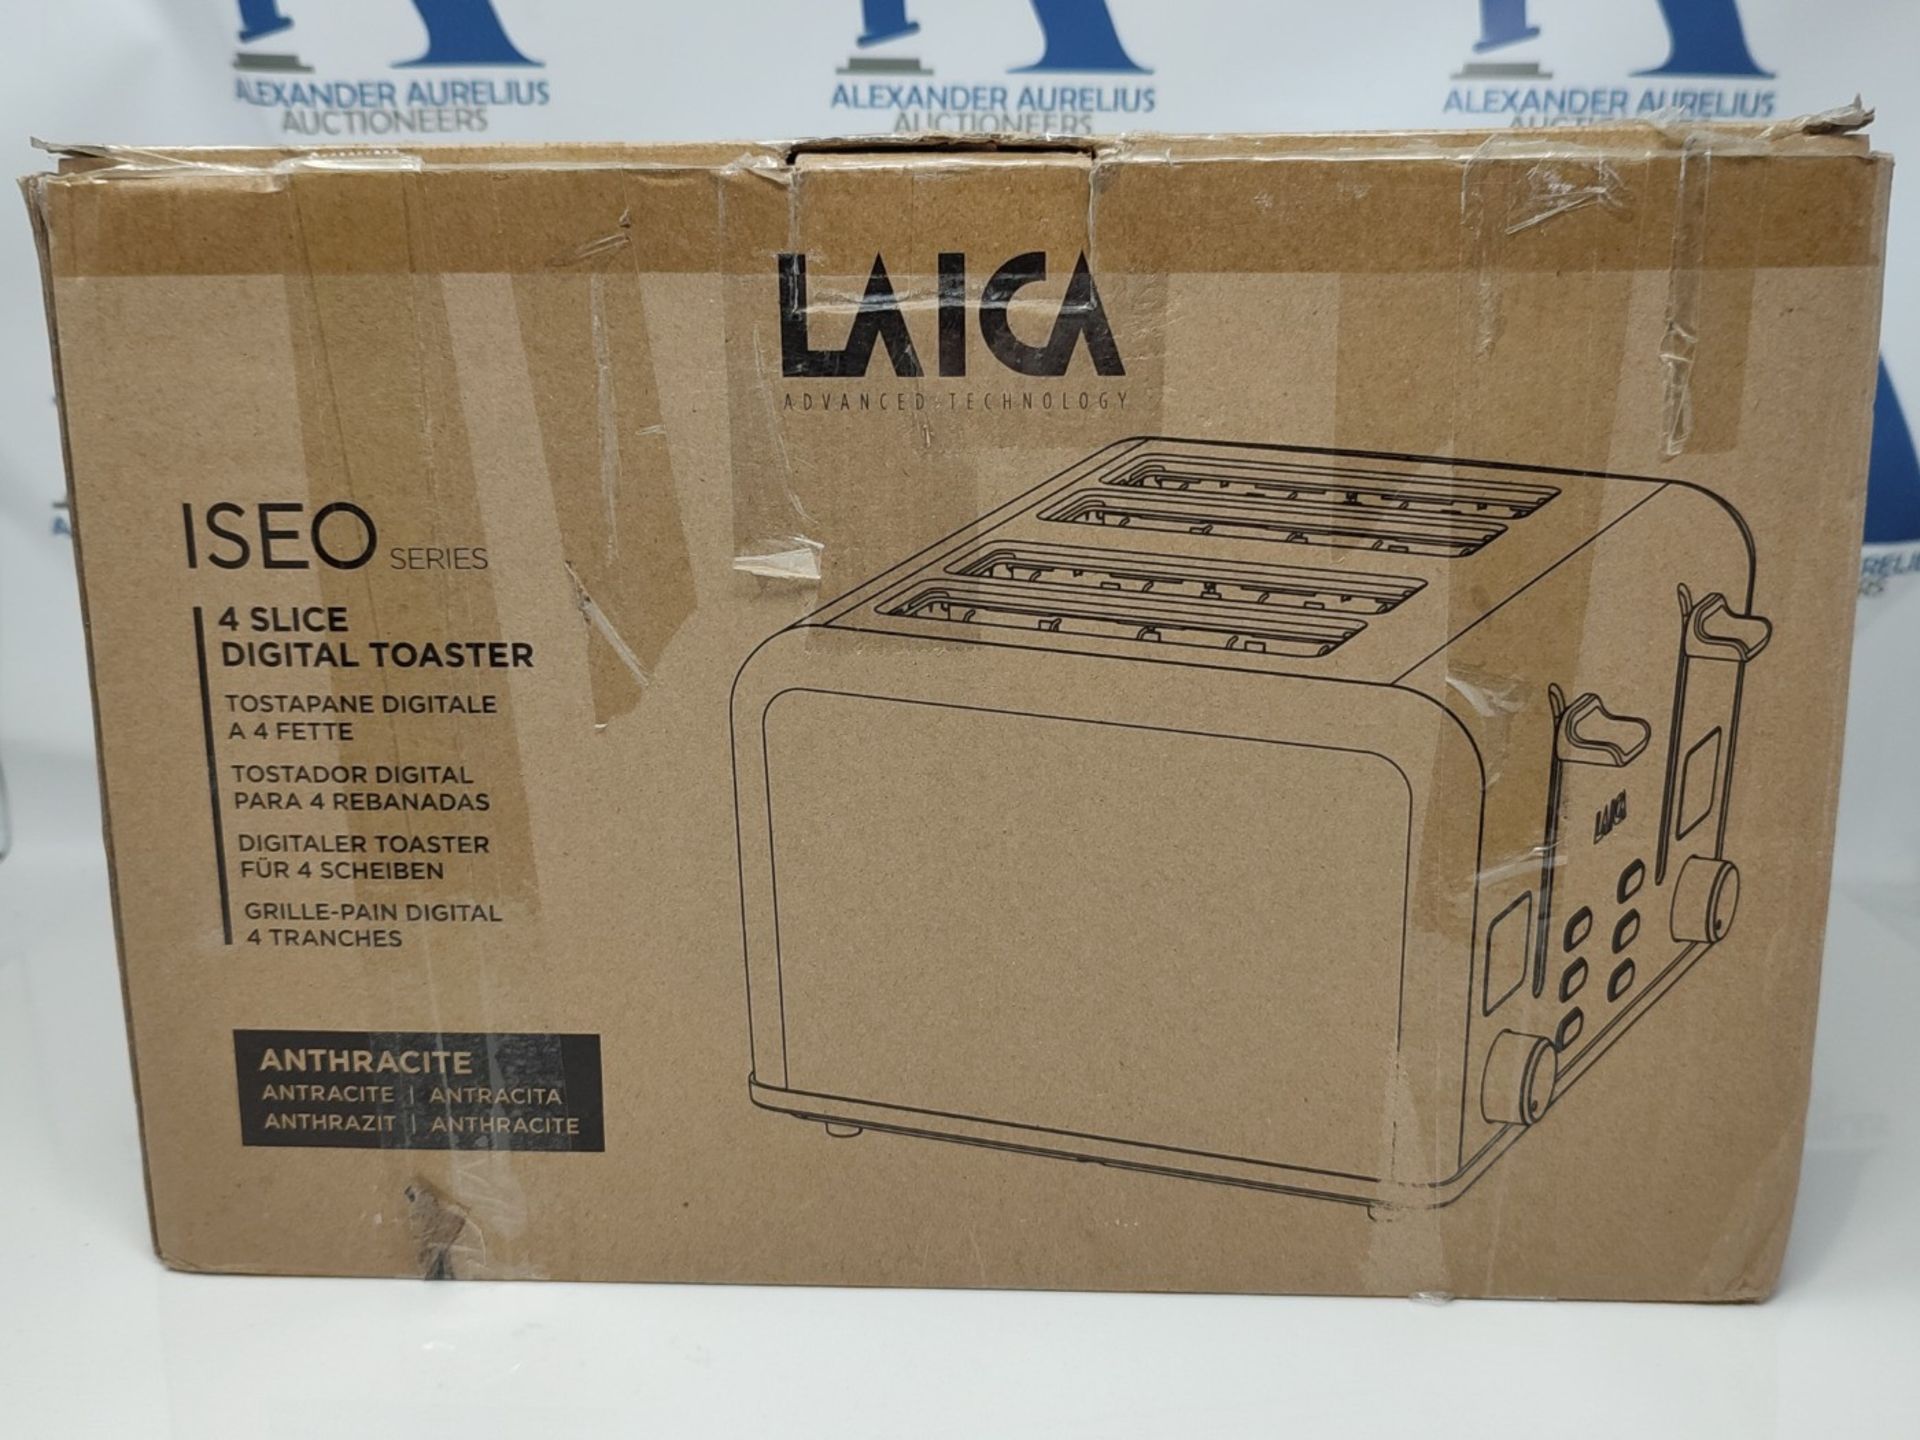 LAICA ISEO 4 slice digital toaster with Independent High Lift & Extra-Wide Slots, Defr - Image 3 of 3